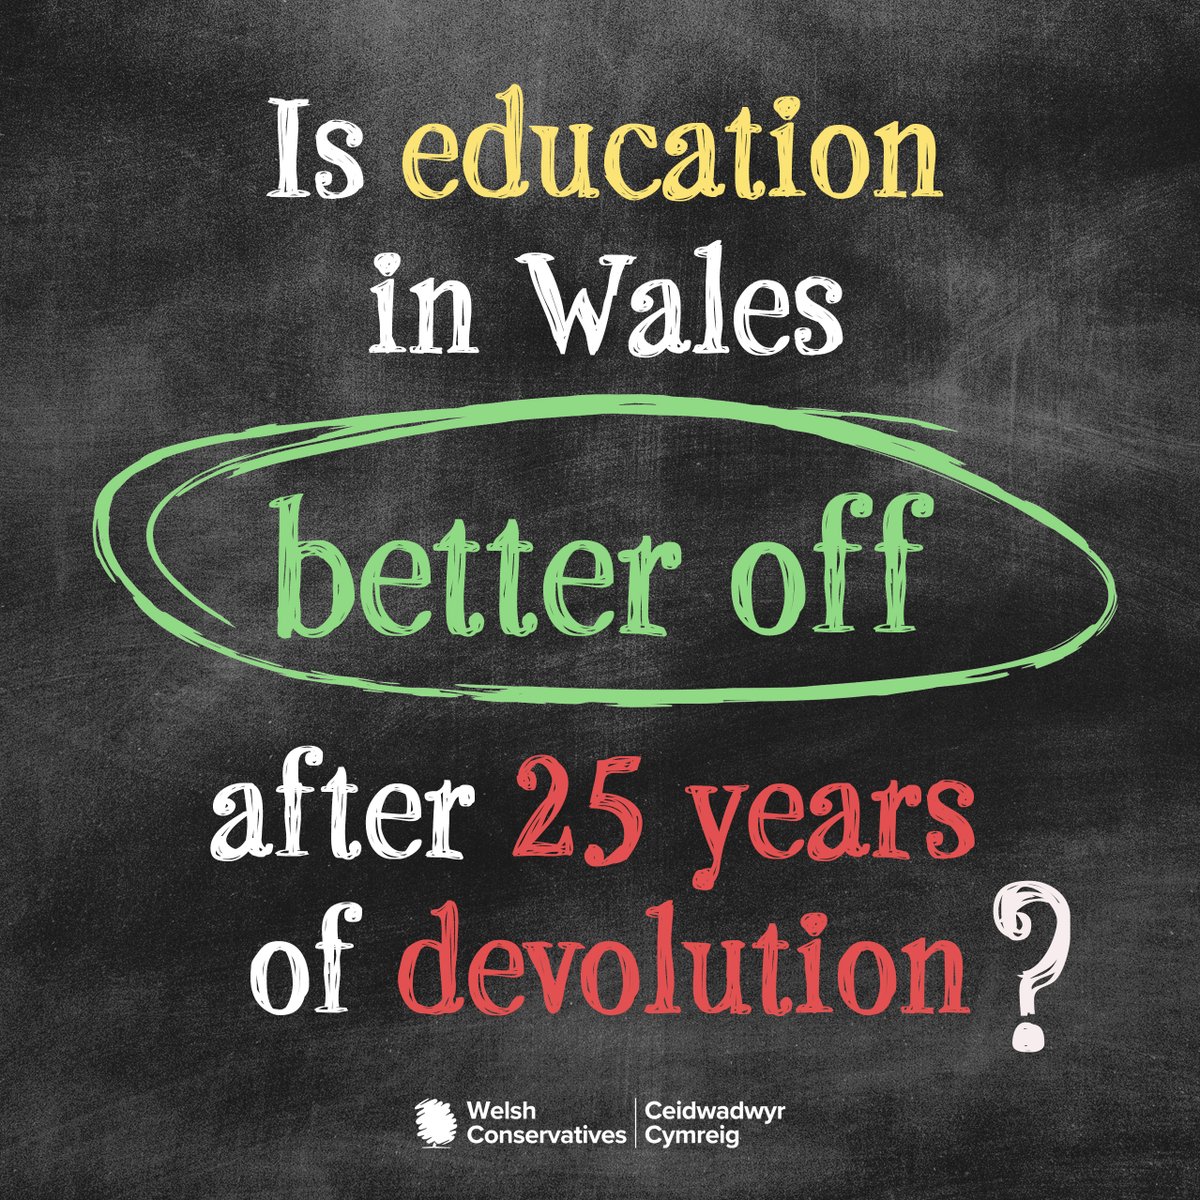 ⌛️ After 25 years of devolution, let's take a look at how education has fared under Labour for the past quarter of a century: 📉 Steepest decline in education results 🧮 Worst PISA results in the UK 📈 Rising absenteeism 📊 Growing attainment gaps 👨‍🏫 A teacher recruitment crisis